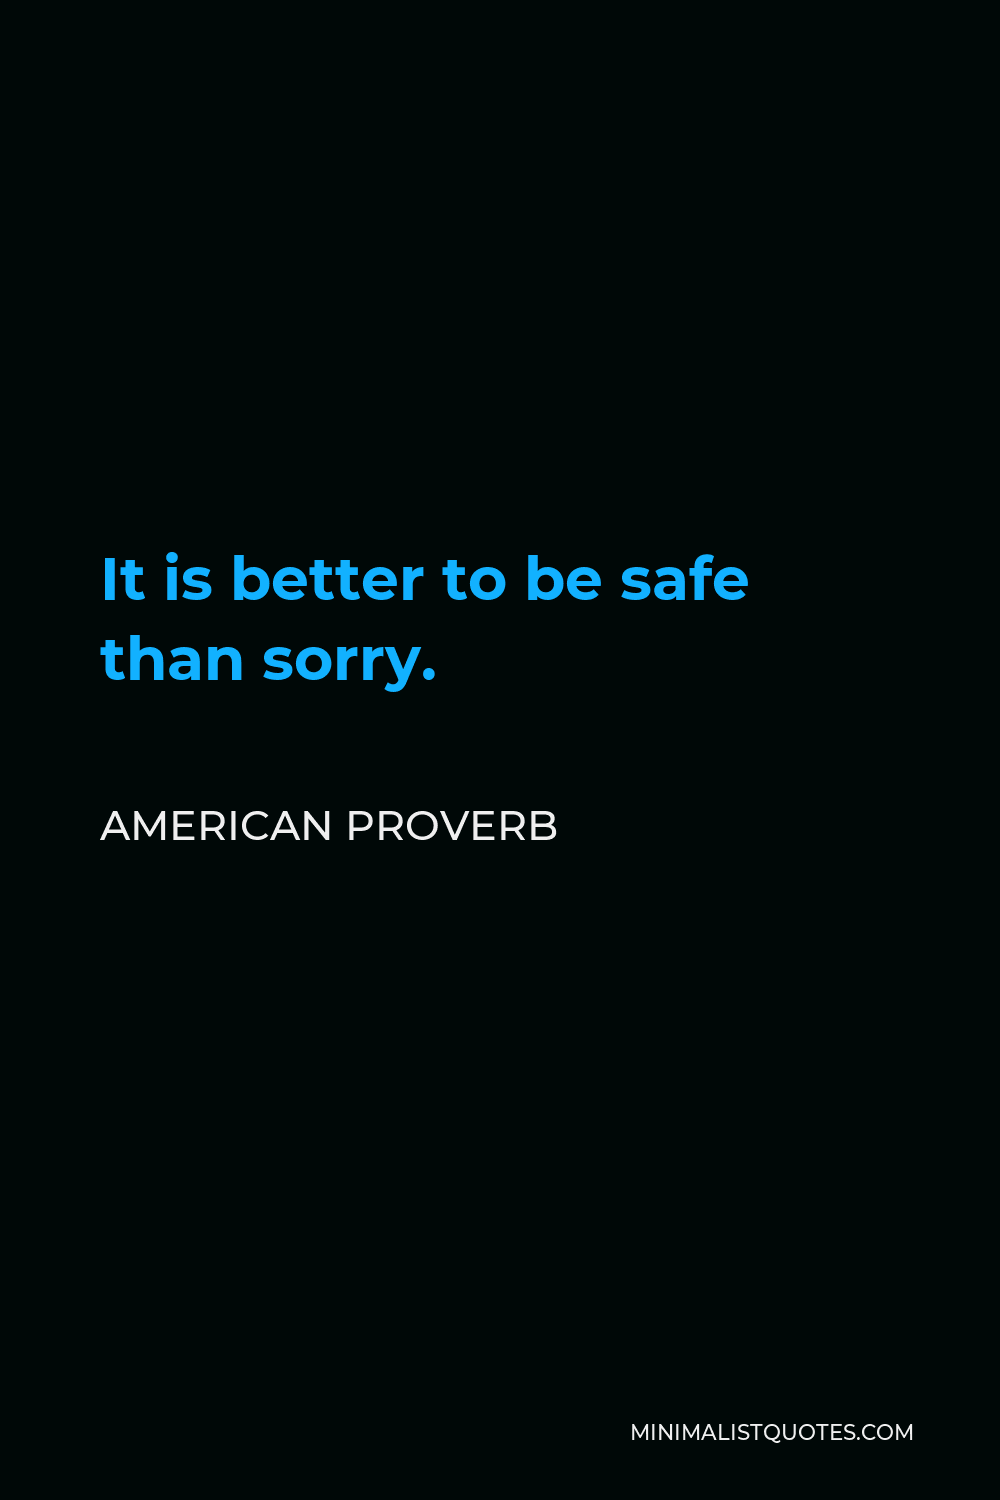 American Proverb Quote - It is better to be safe than sorry.